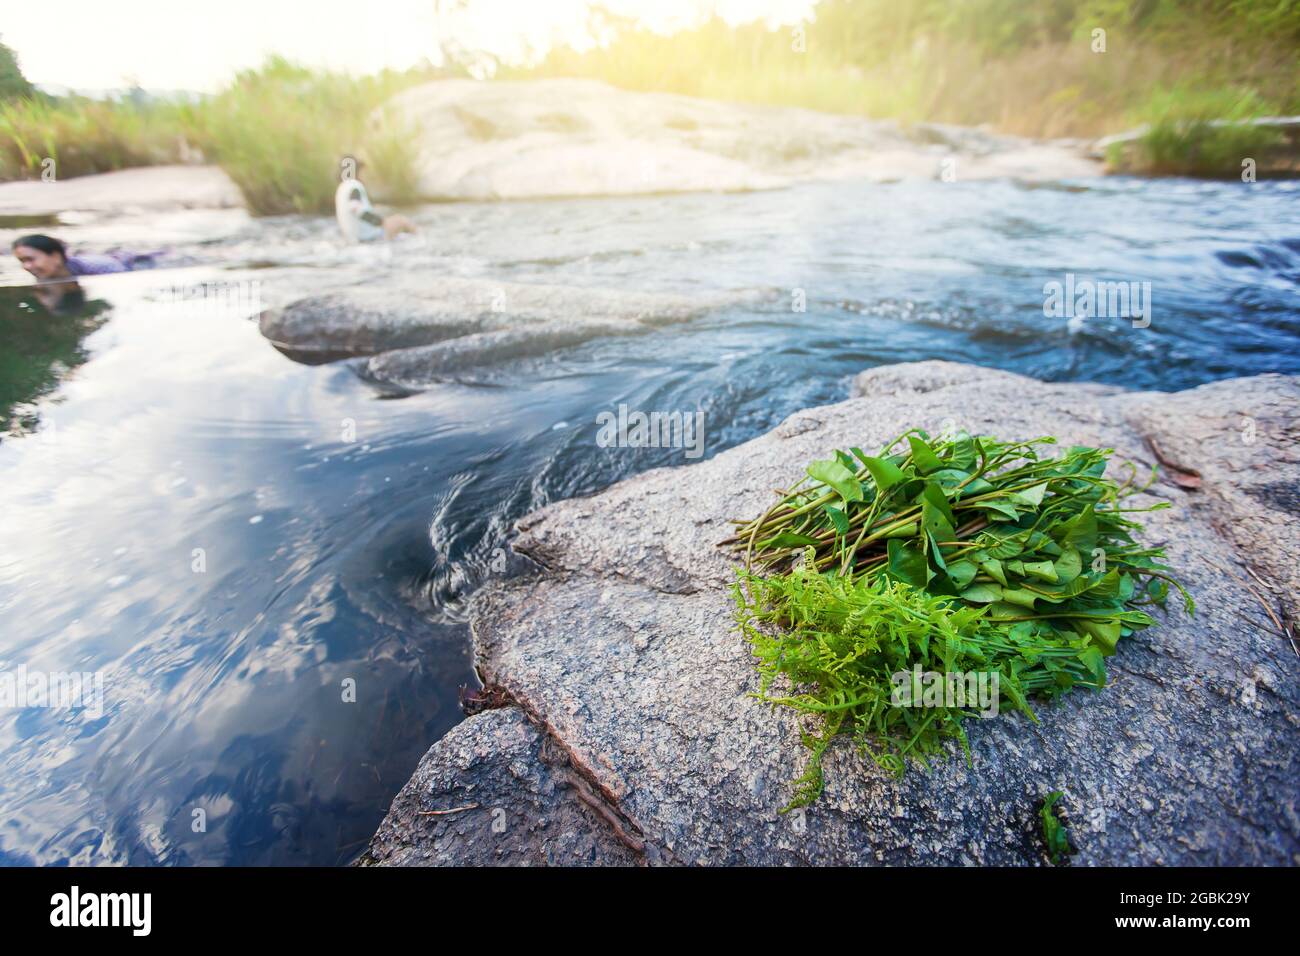 Harvesting fresh wild edible tropical plants, fern and water spinach along a creek. Mother and daughter playing in a creek blurred in the background. Stock Photo